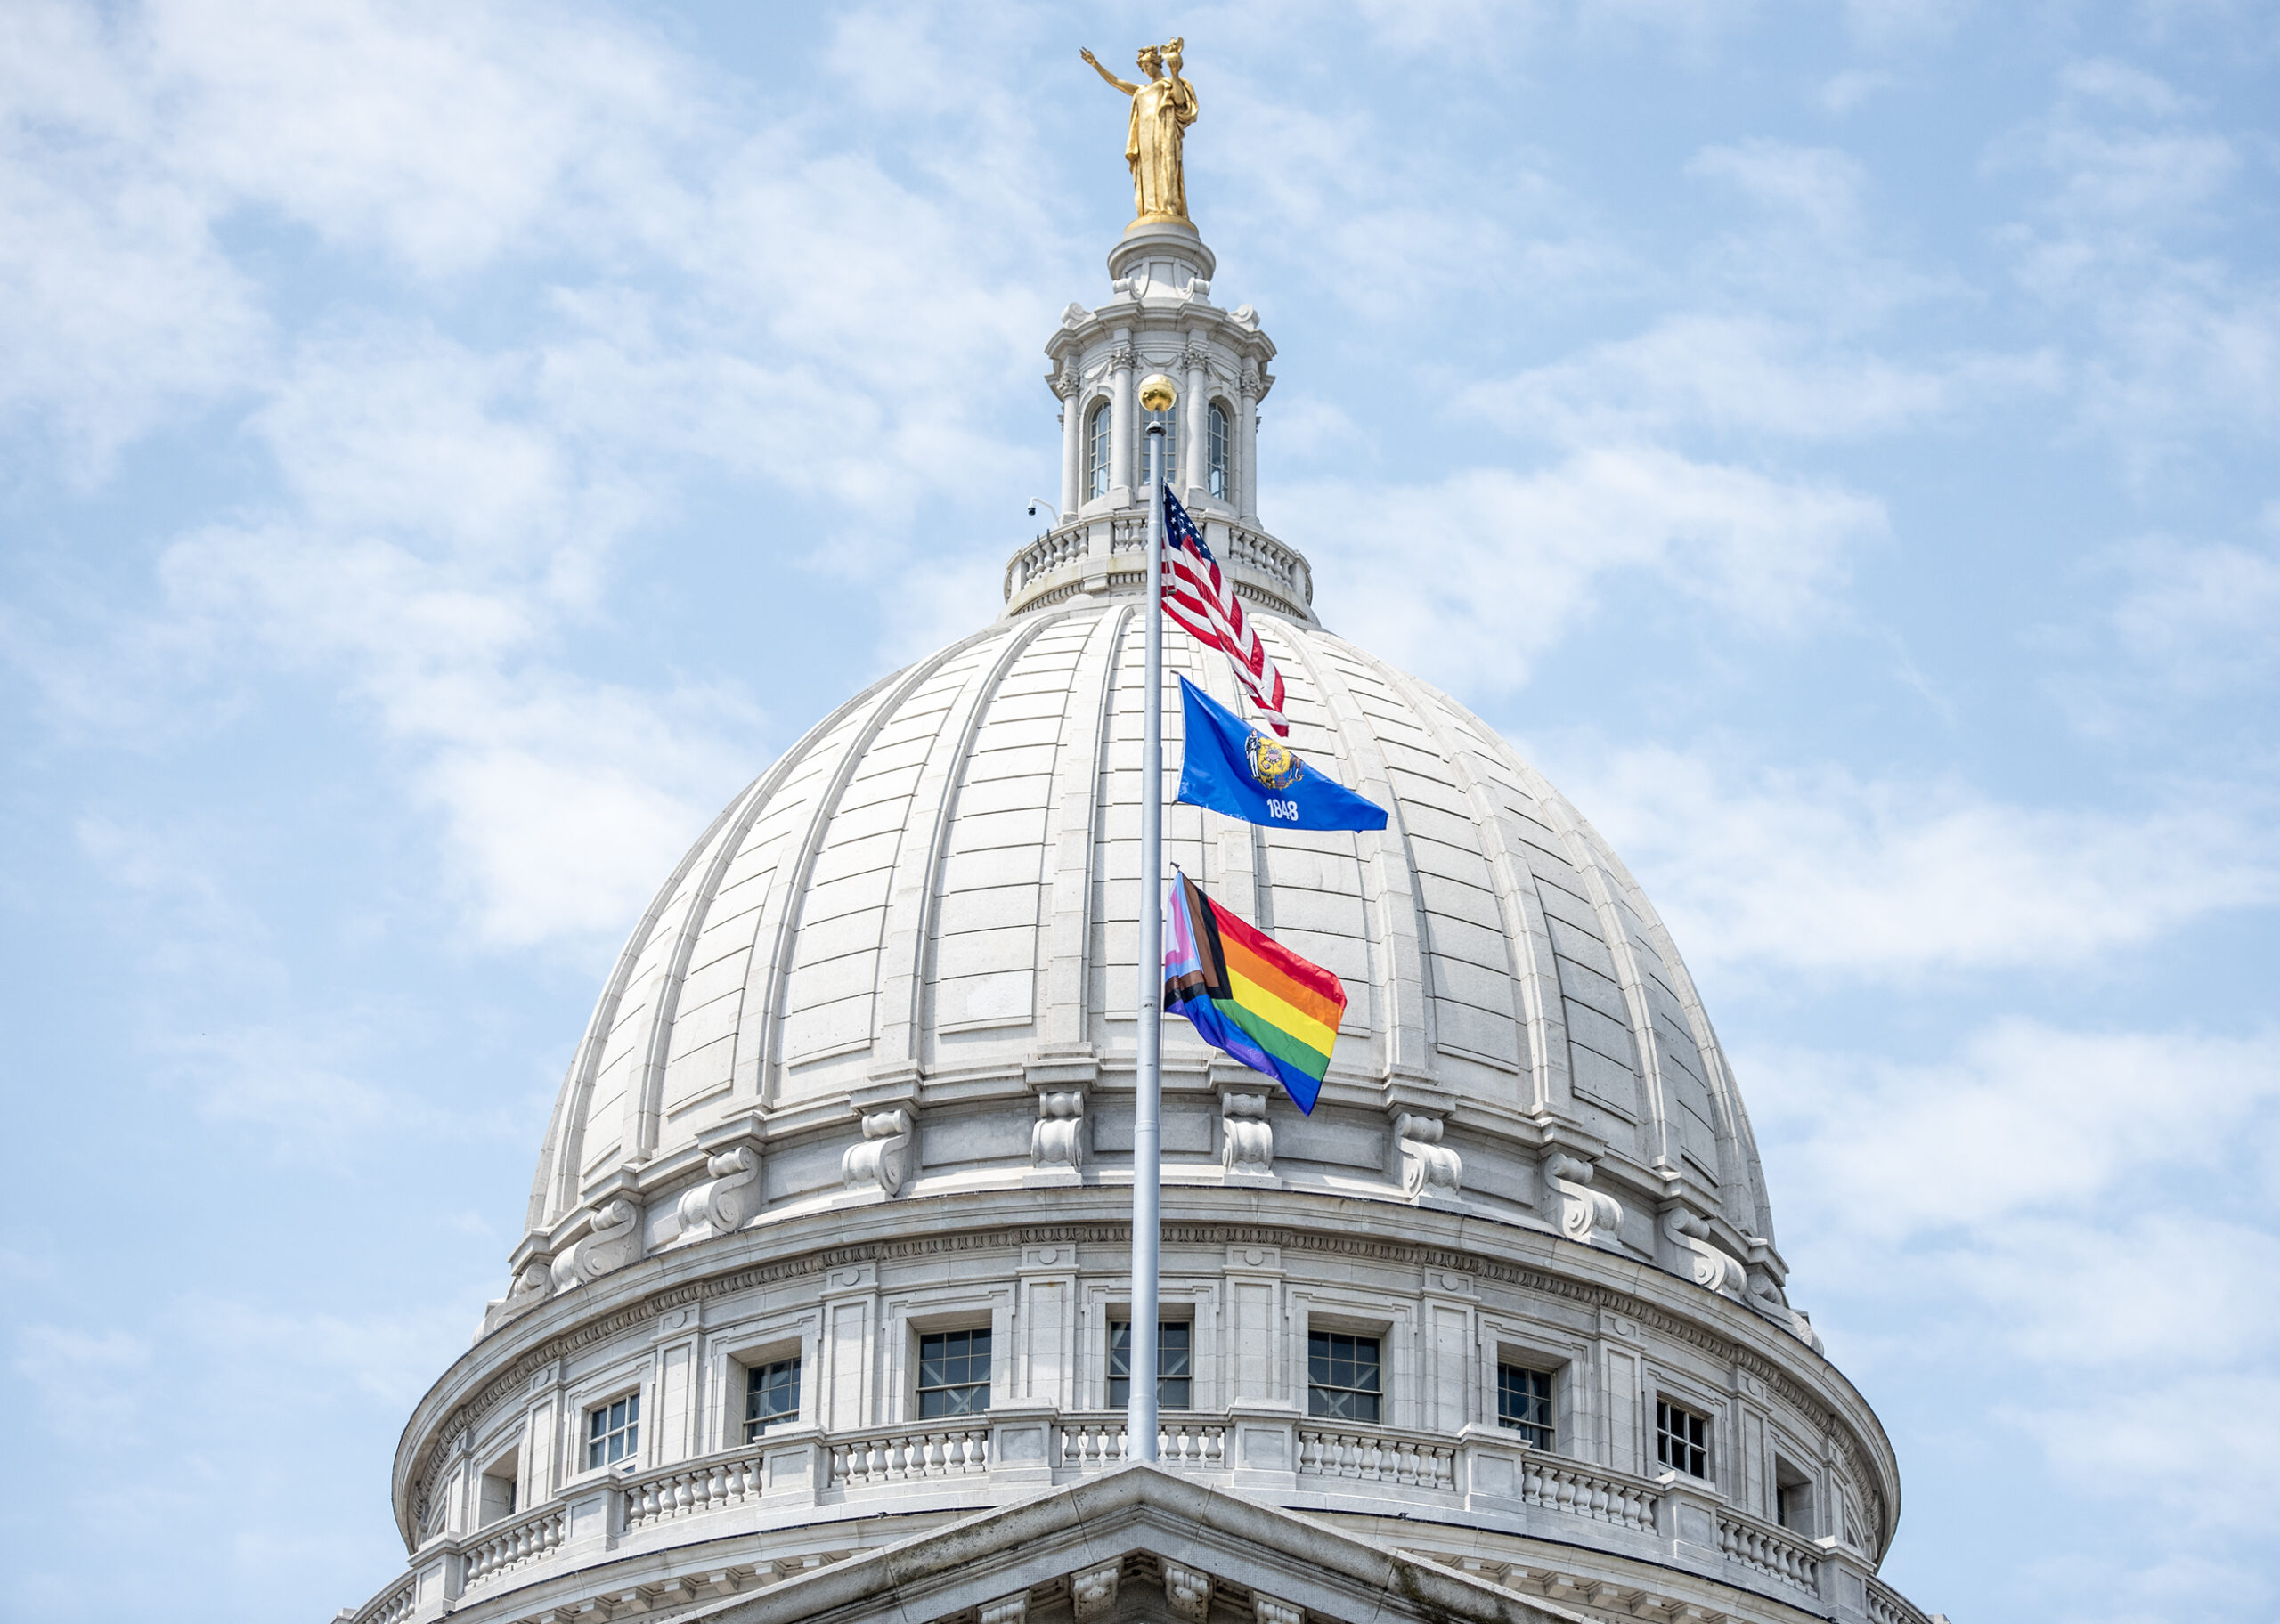 Gov. Tony Evers marks LGBTQ+ Pride Month with rainbow flag raising at Wisconsin State Capitol